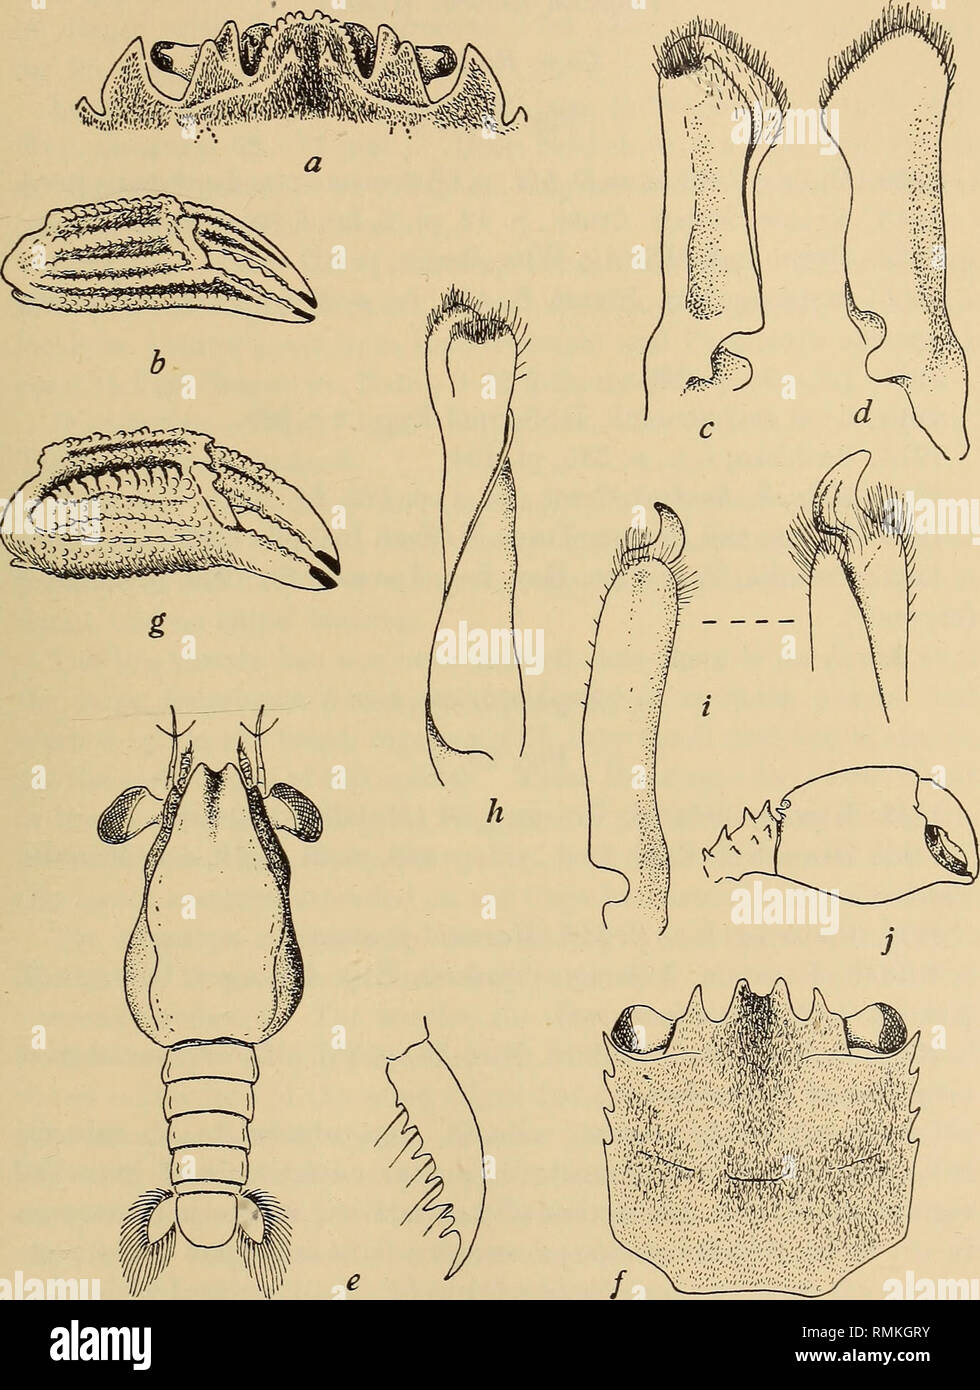 . Annals of the South African Museum = Annale van die Suid-Afrikaanse Museum. Natural history. Descriptive Catalogue of South African Decapod Crustacea. 135. Fig. 26.—Plagusia chabrus (Linn.), a, front of carapace, b, outer surface of chela &lt;J. c, d, dorsal and ventral views of 1st pleopod (J. e, Megalopa stage, with dactyl of walking leg. /, carapace of juvenile in 1st post-larval stage. Plagusia depressa (Fabr.). g, outer surface of chela &lt;J. h, ventral view of 1st pleopod &lt;$. Percnon planissimum (Herbst). i, ventral view of 1st pleopod &lt;$, with dorsal view of apex, j, upper surf Stock Photo